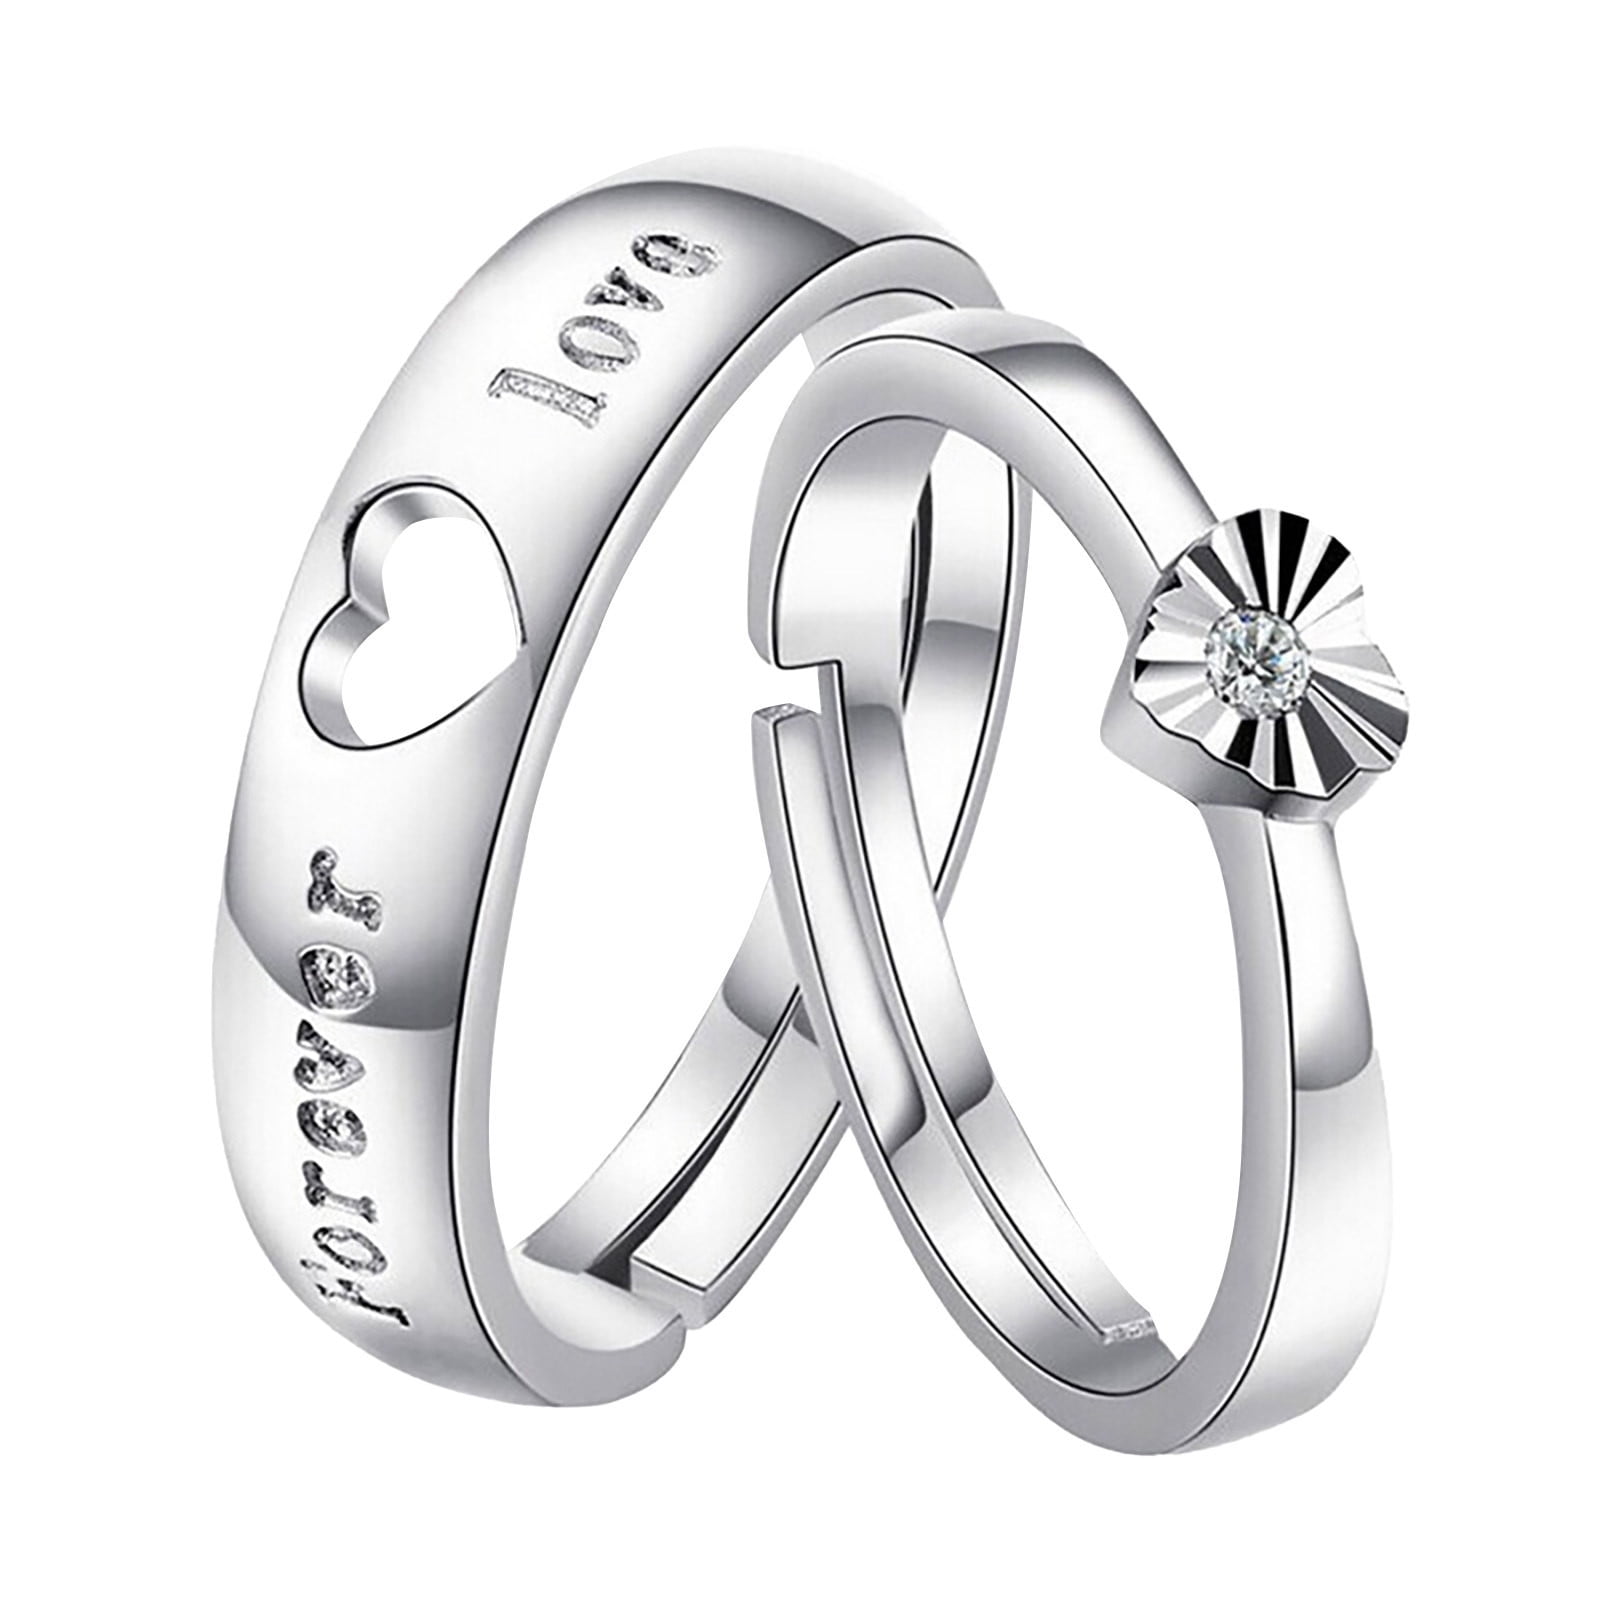 Superlative 925 Sterling Silver Couple Rings